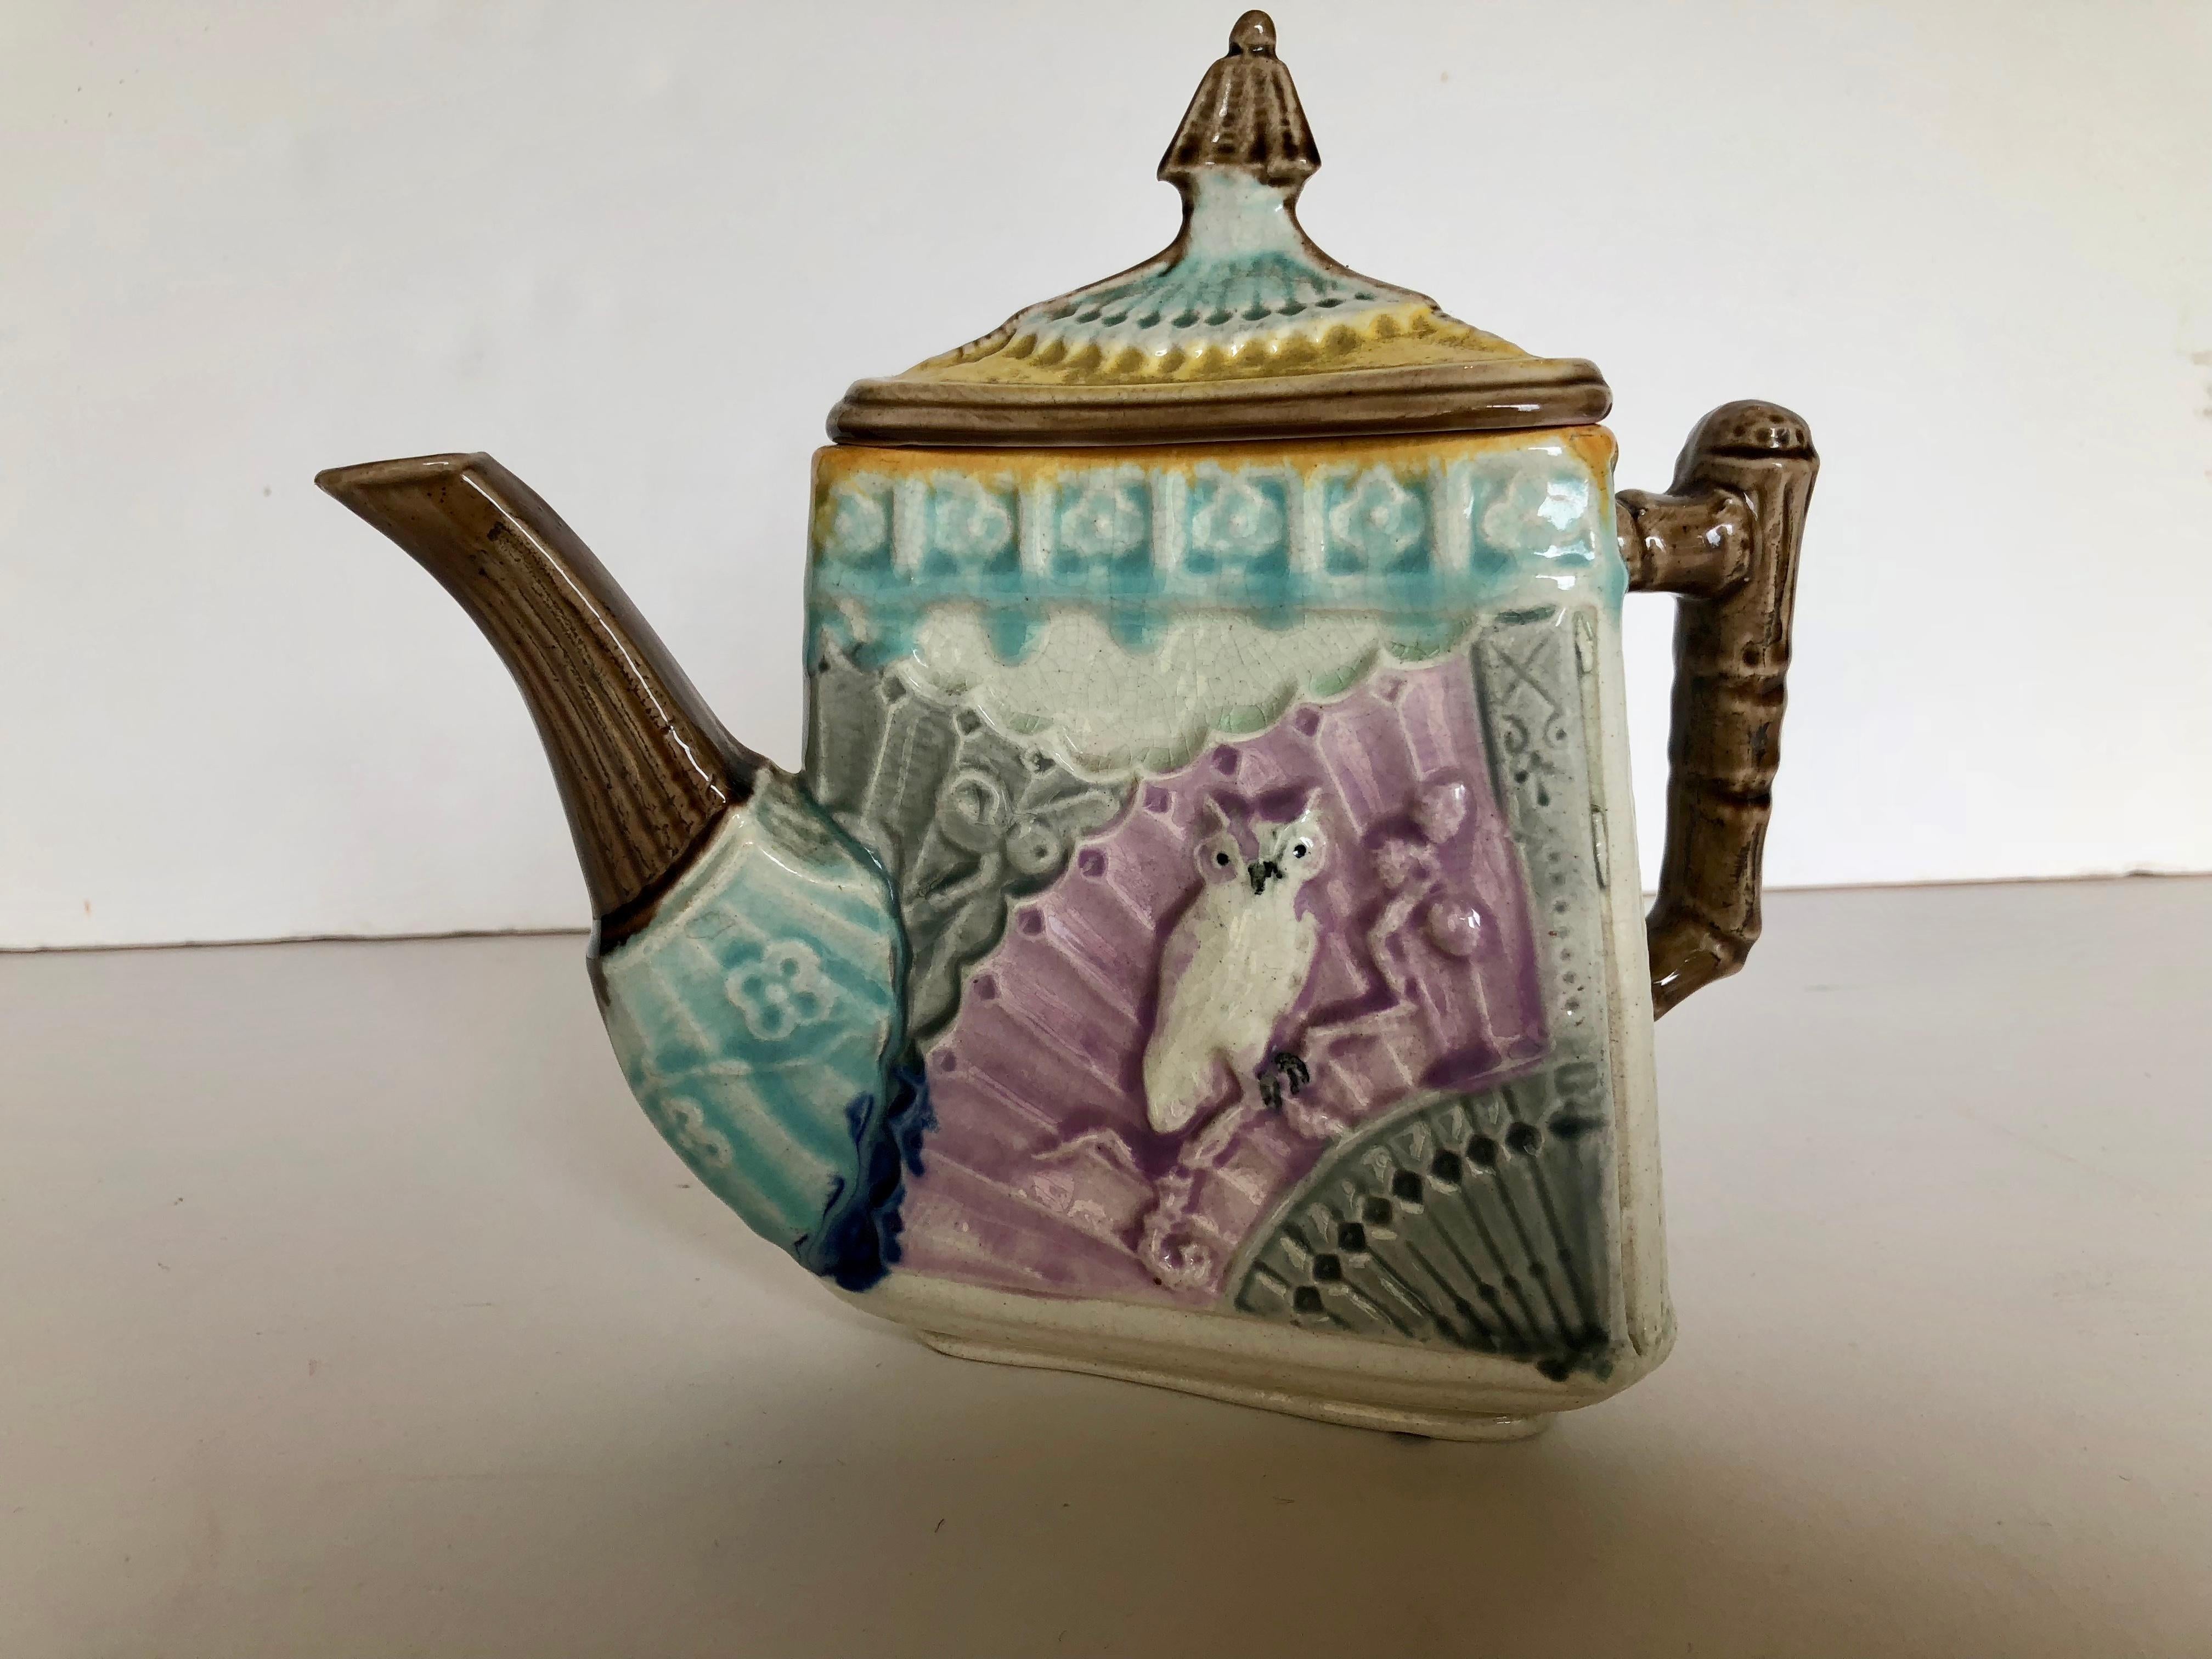 Rare, antique Majolica triangular owl and fan teapot, circa 1885. Soft colors, yellow, turquoise, lavender, brown, dark royal blue, soft gray and off white. Inside is soft lavender/pink. Very good condition with minimal overall crazing typical of